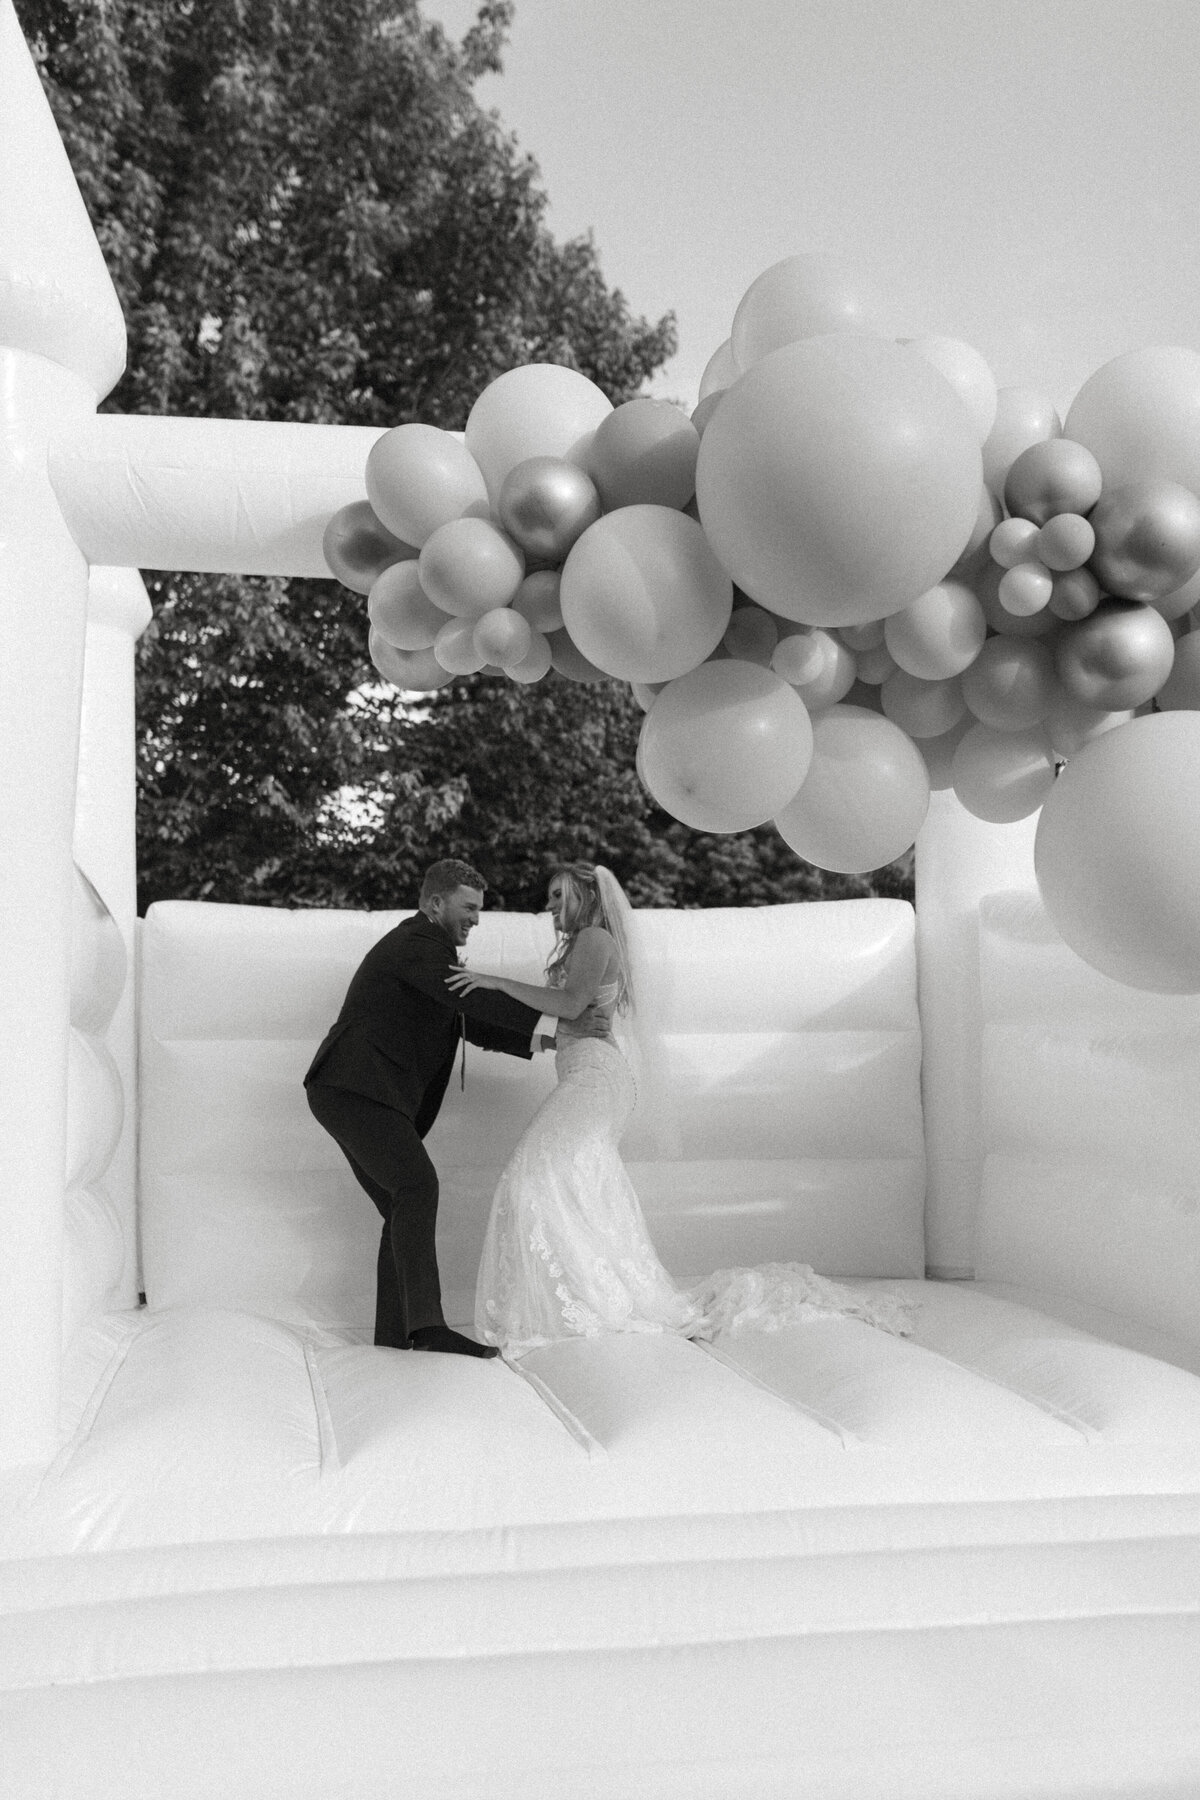 Bride and groom jumping in a white bouncy house IN BLACK AND WHITE.